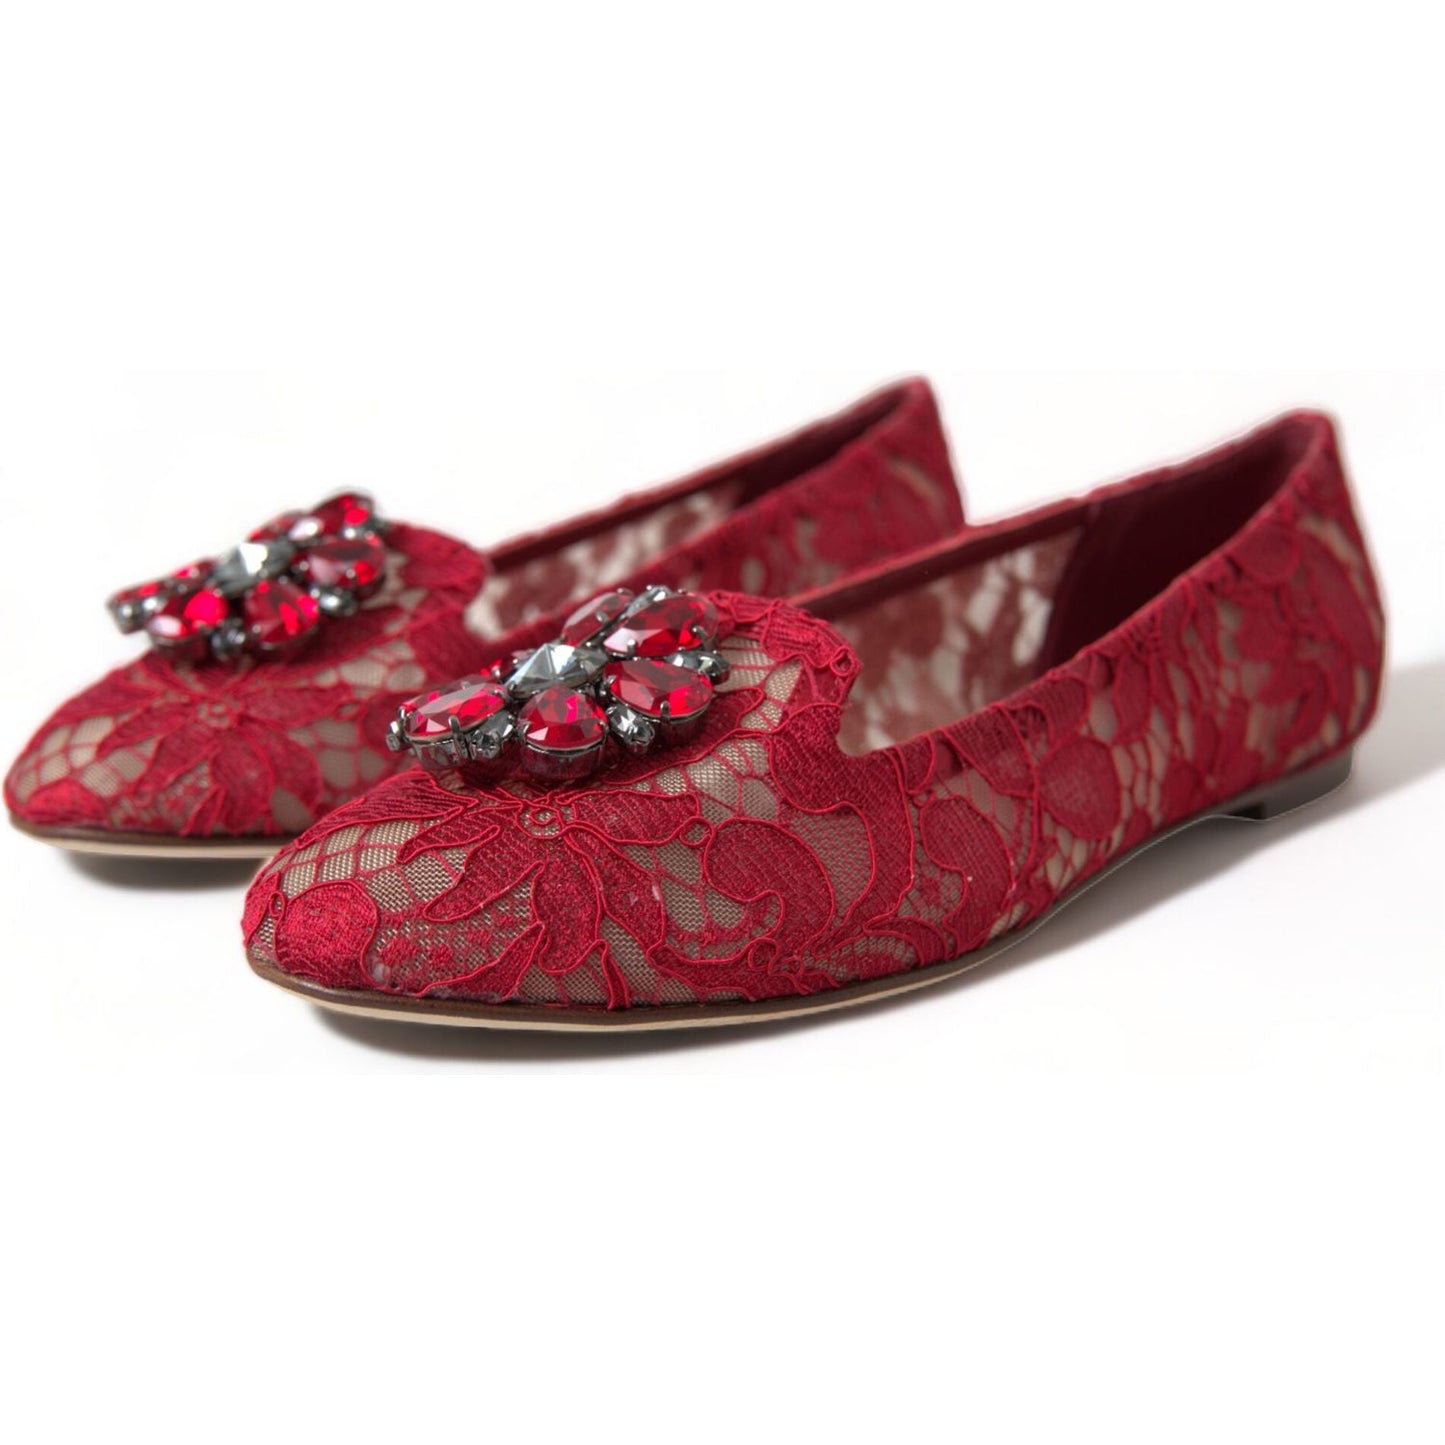 Dolce & Gabbana Elegant Floral Lace Vally Flats red-vally-taormina-lace-crystals-flats-shoes 465A9052-bg-scaled-aa47916e-2b1.jpg